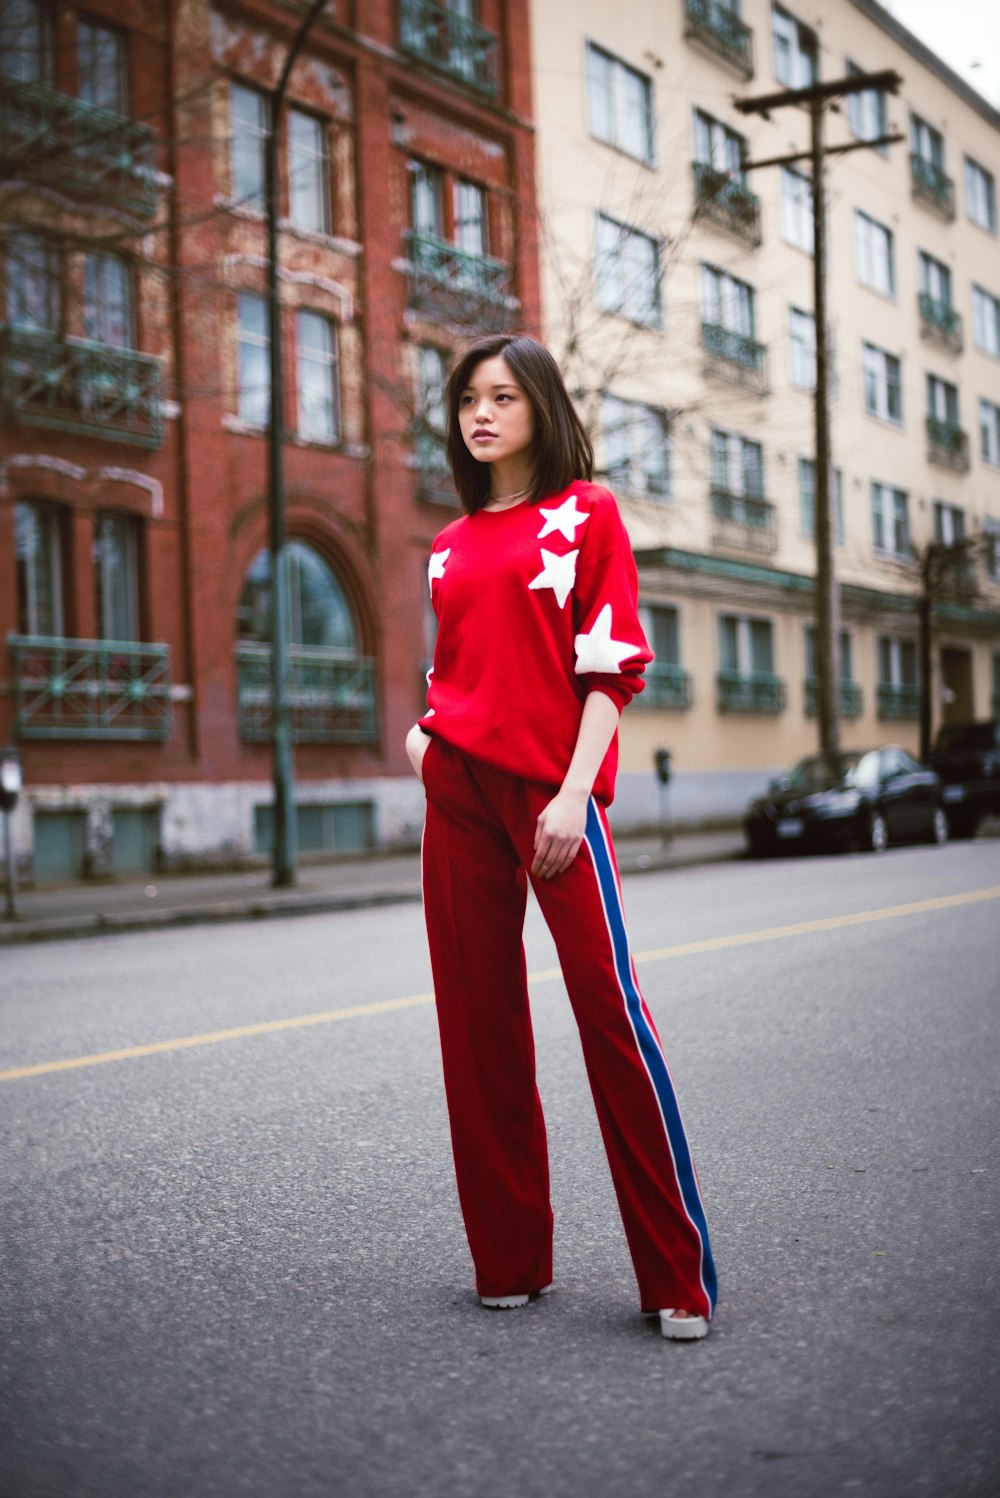 woman in red and white long sleeve shirt standing on road during daytime